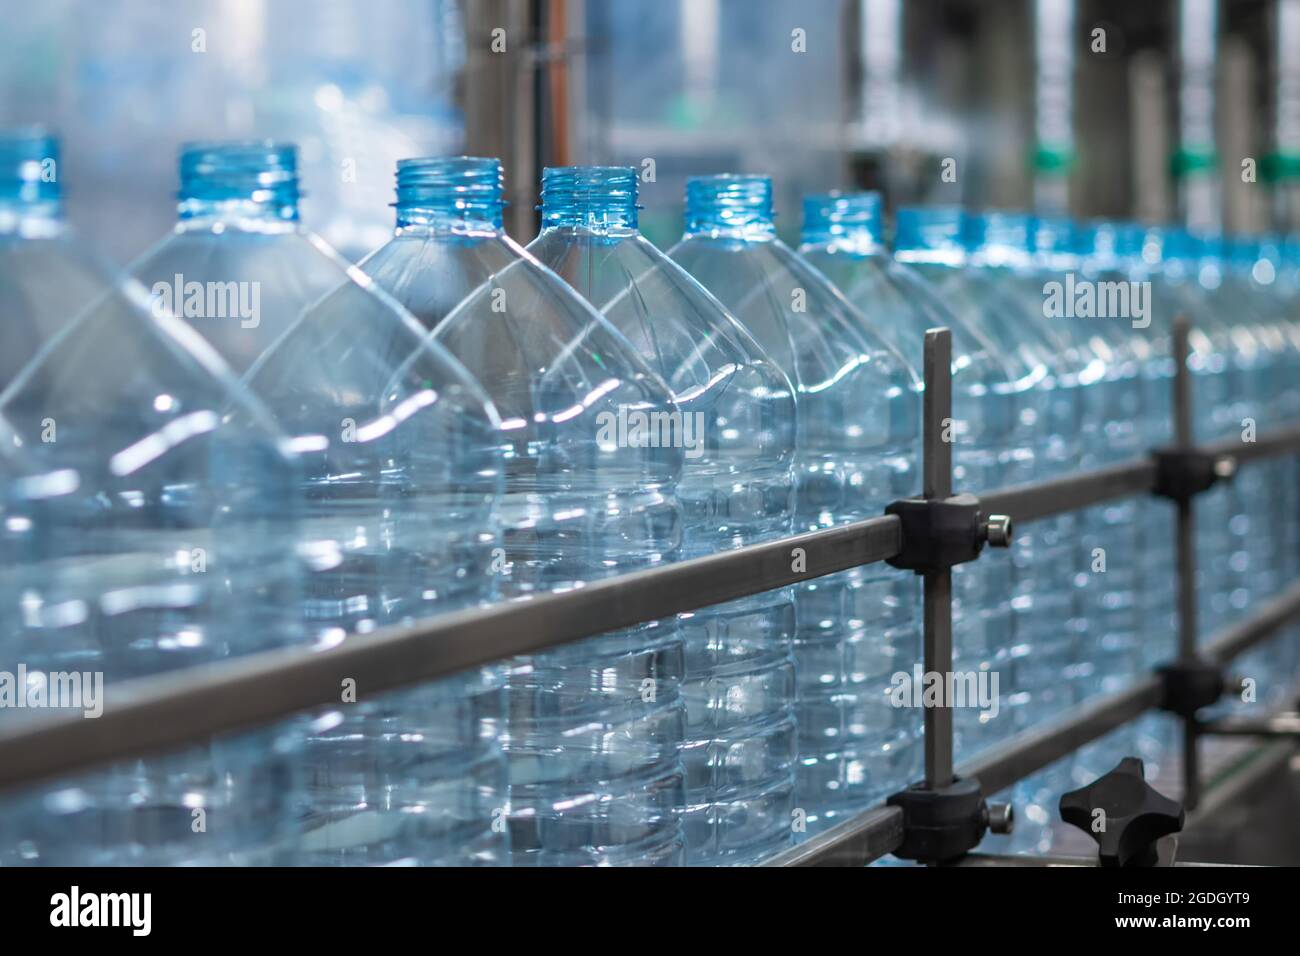 Empty blue five-liter plastic bottles on a conveyor belt. Automated production of drinking water. Food production Stock Photo